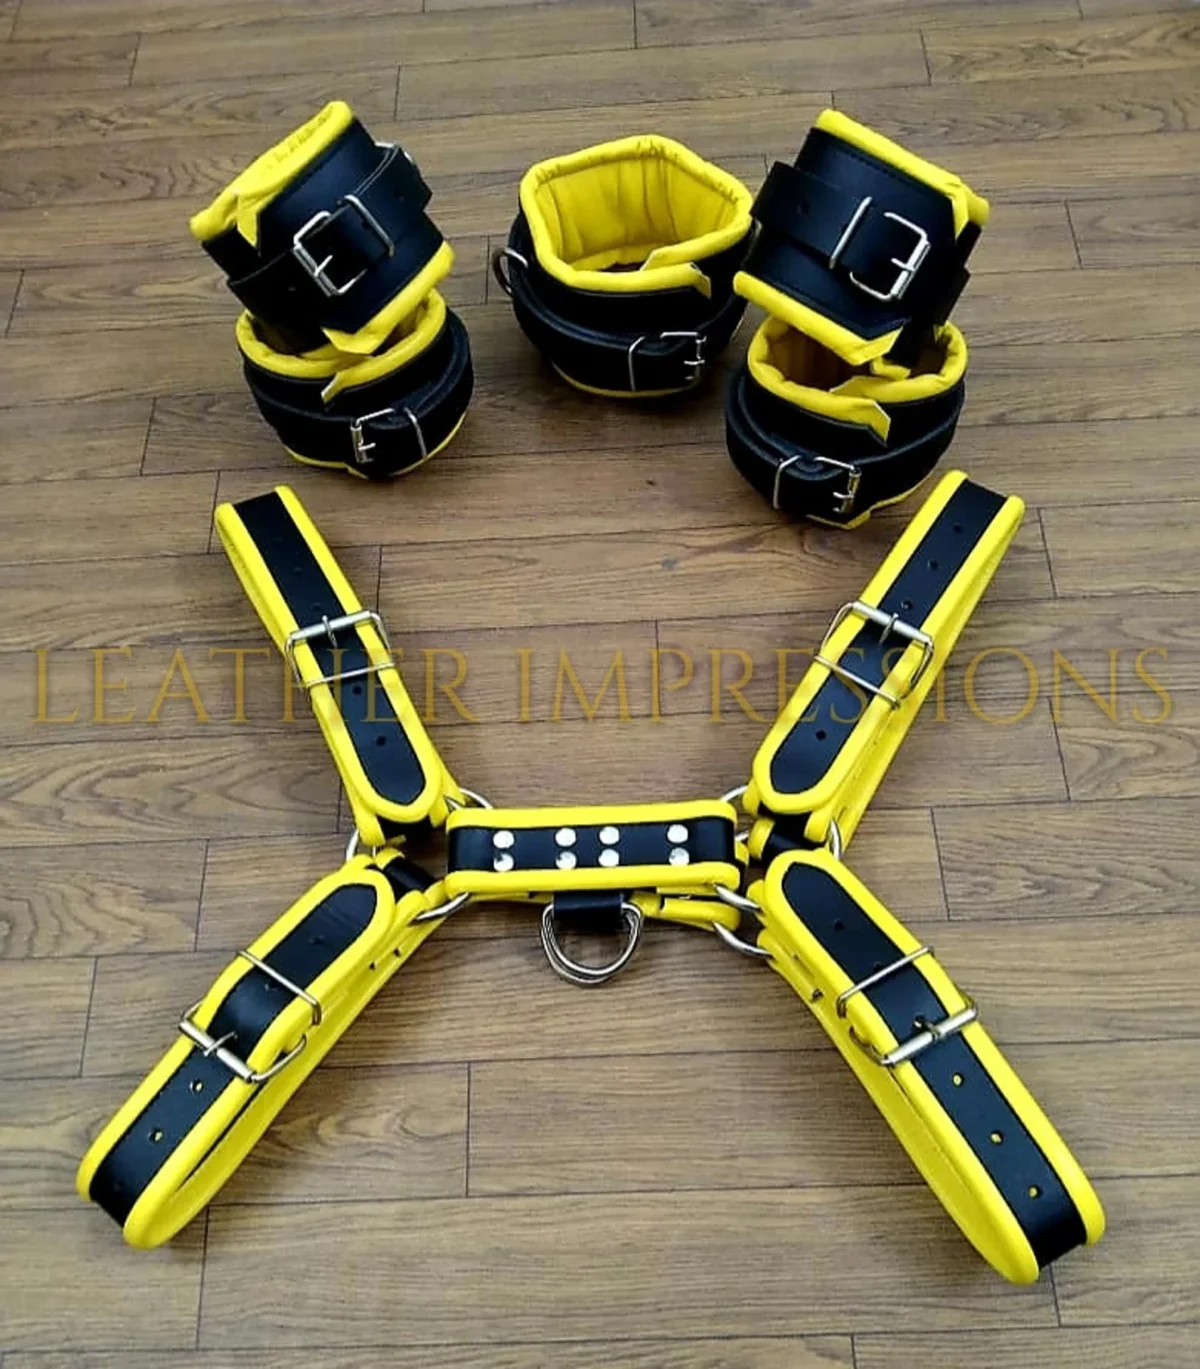 bdsm leather harness, full body leather harness, leather harness mens